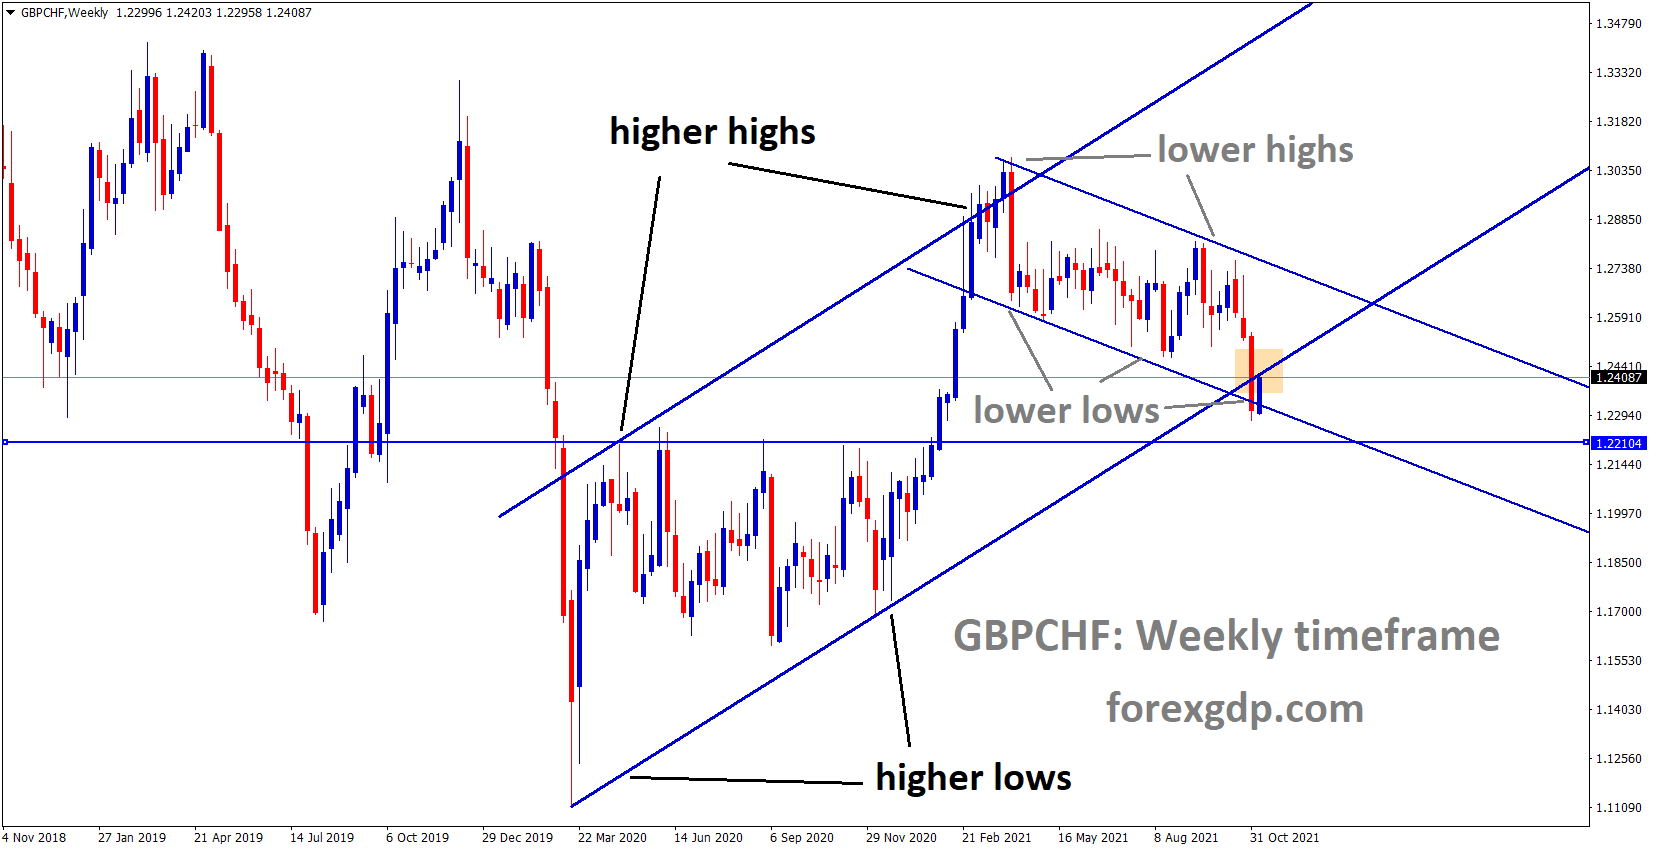 GBPCHF is moving in an Ascending channel and the market rebounded from the higher low